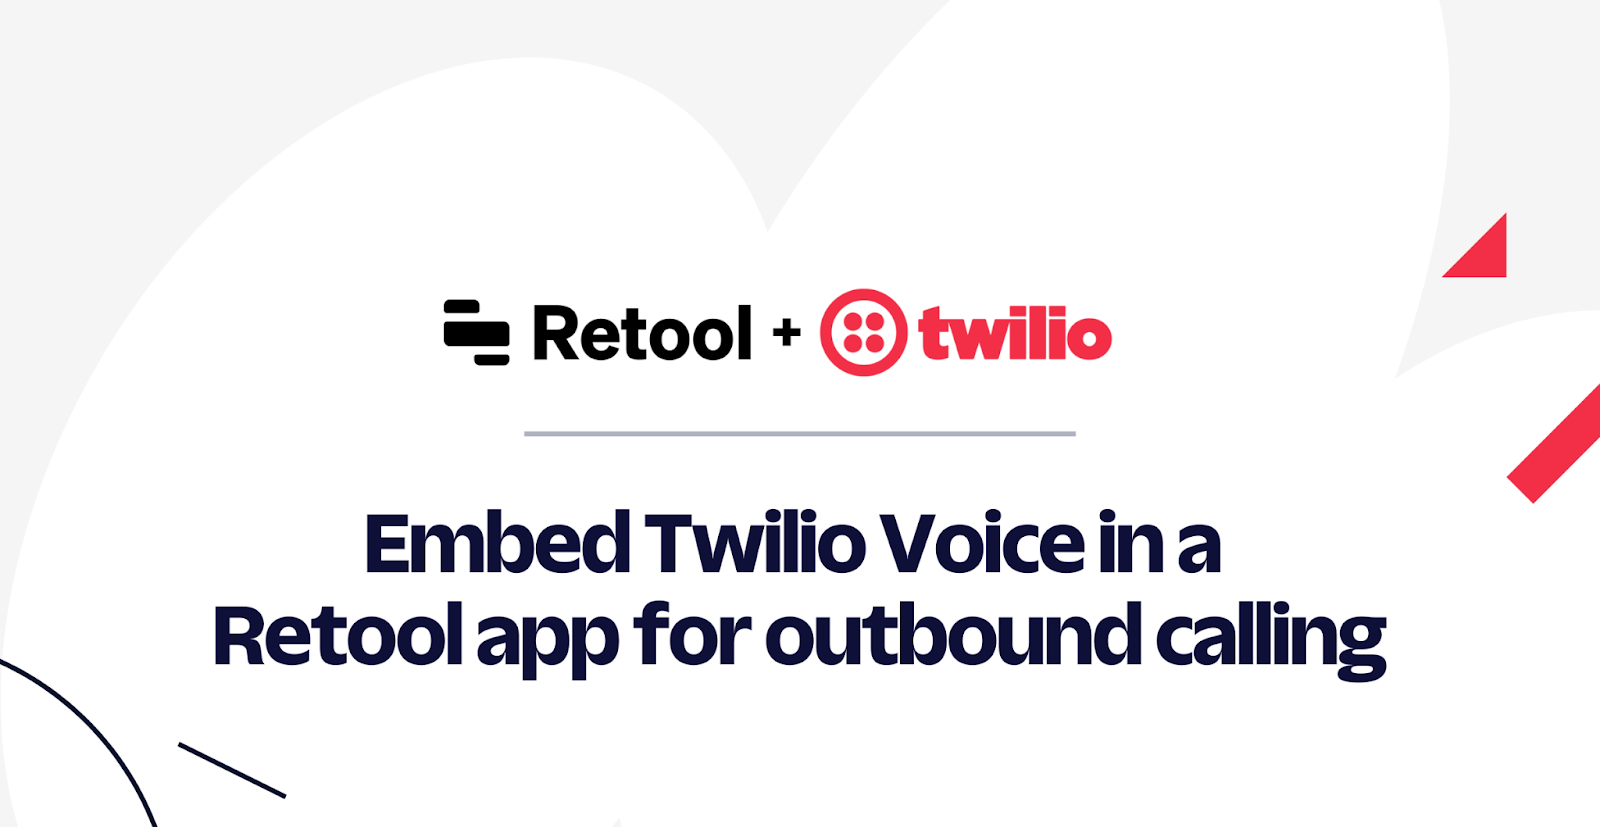 Embed Twilio Voice in a Retool app for outbound calling